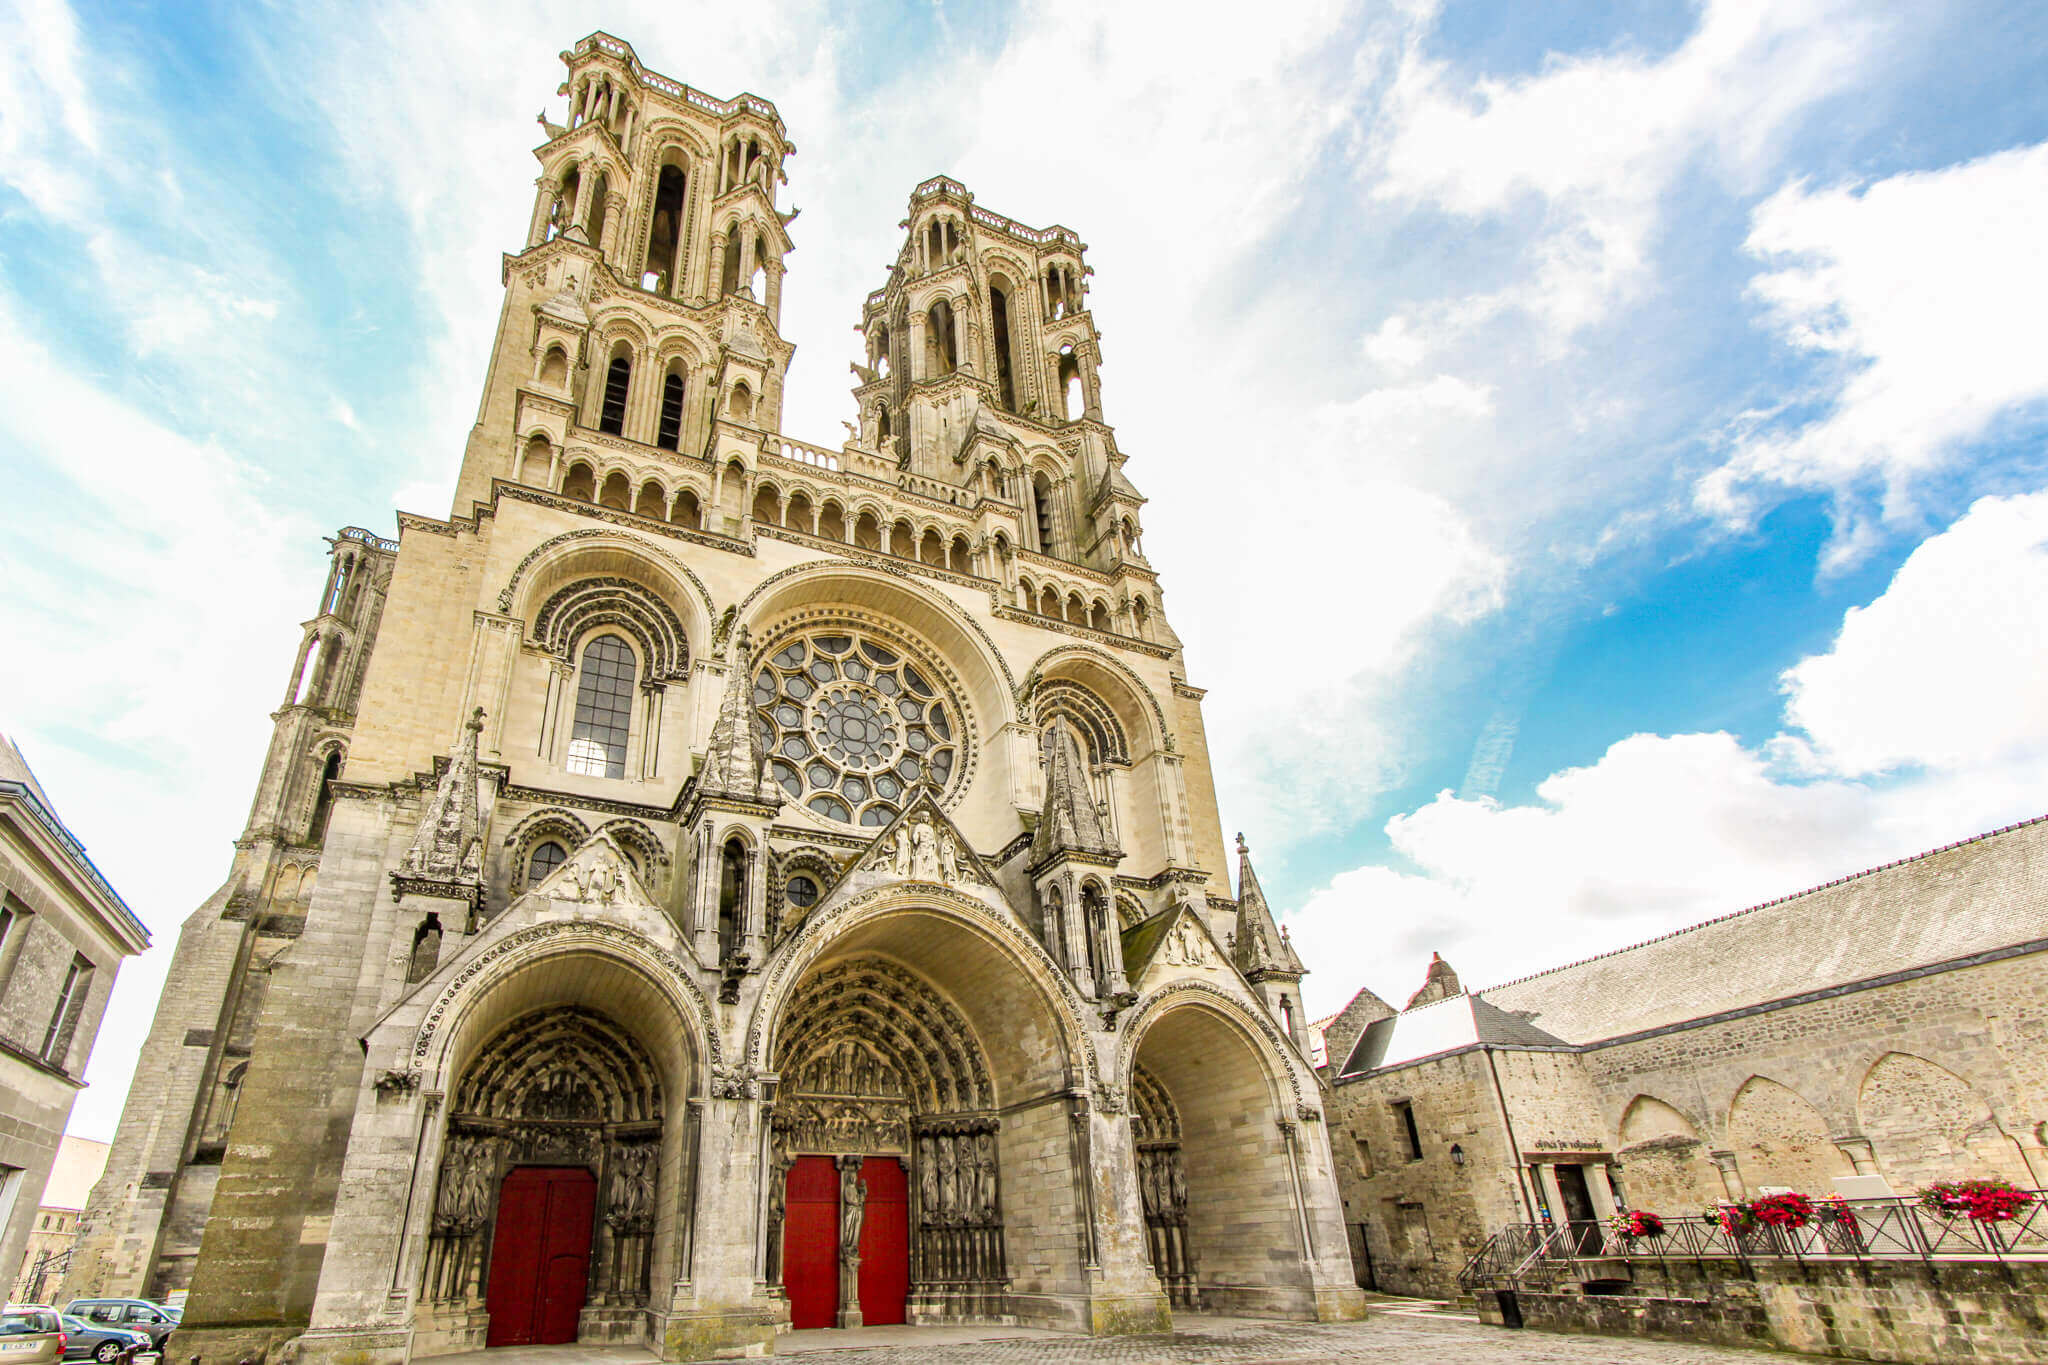 The Laon Cathedral front facade with its deeply recessed portals